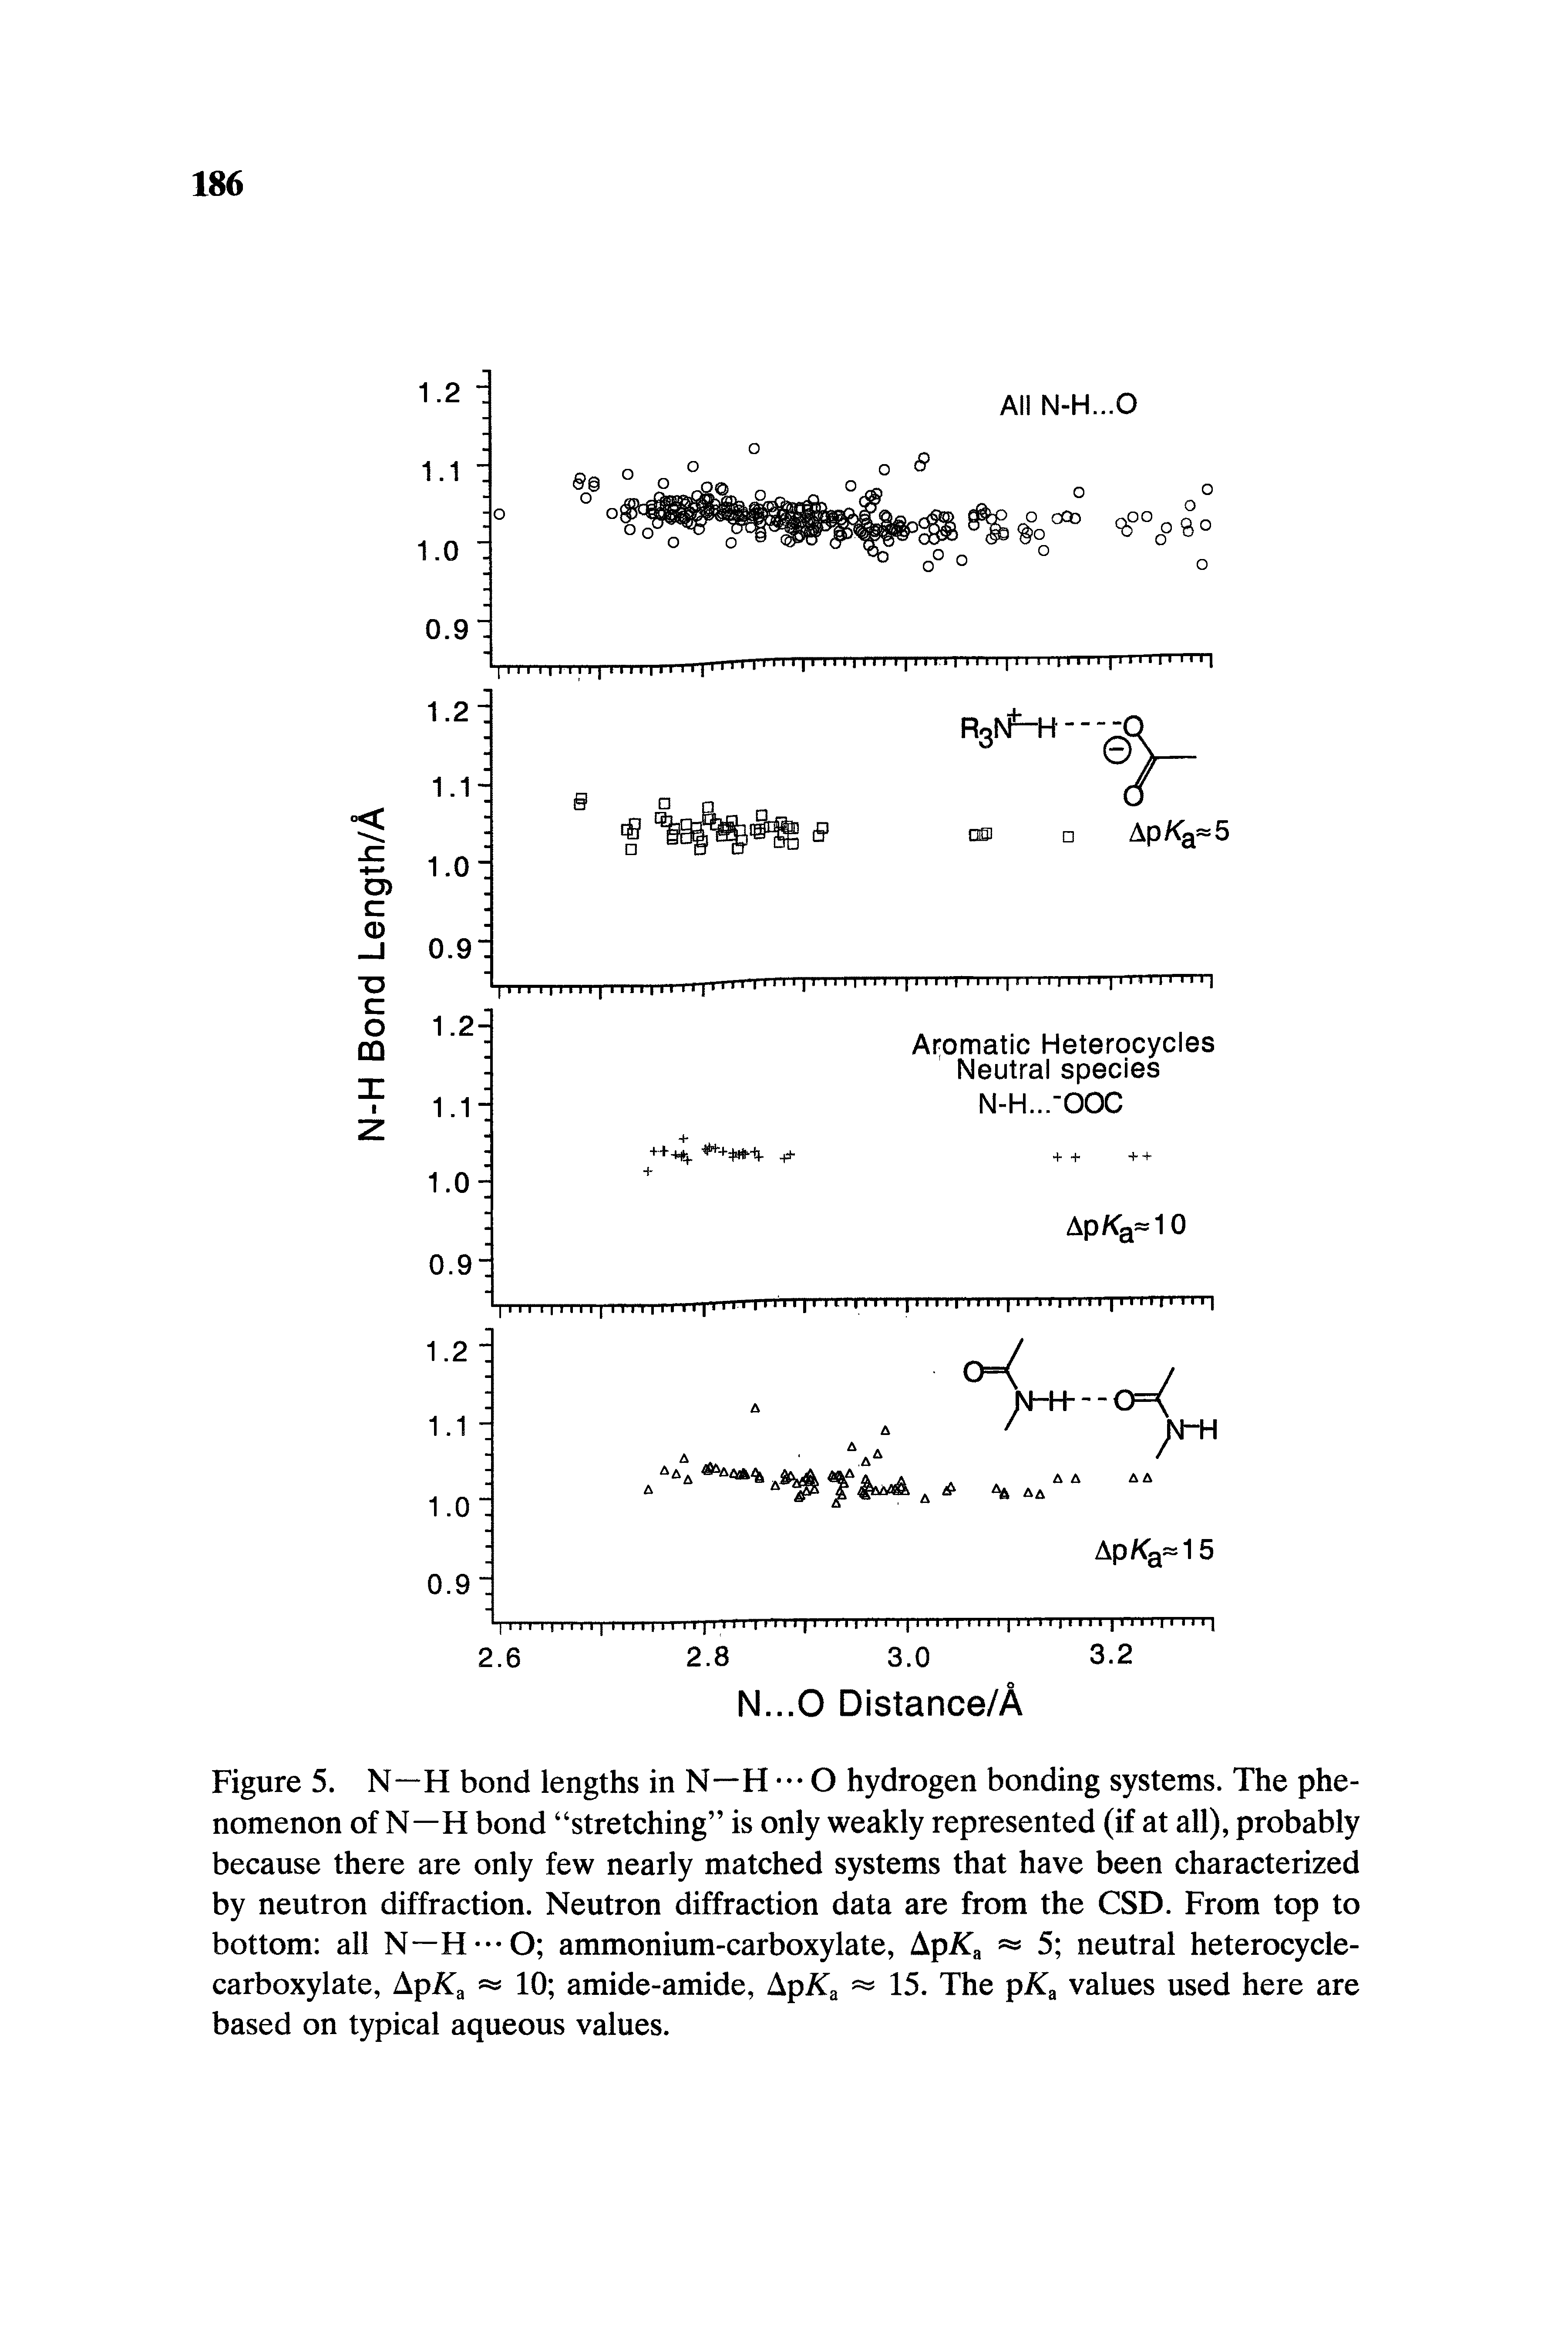 Figure 5. N—H bond lengths in N—H O hydrogen bonding systems. The phenomenon of N—H bond stretching is only weakly represented (if at all), probably because there are only few nearly matched systems that have been characterized by neutron diffraction. Neutron diffraction data are from the CSD. From top to bottom all N—ammonium-carboxylate, ApKa 5 neutral heterocycle-...